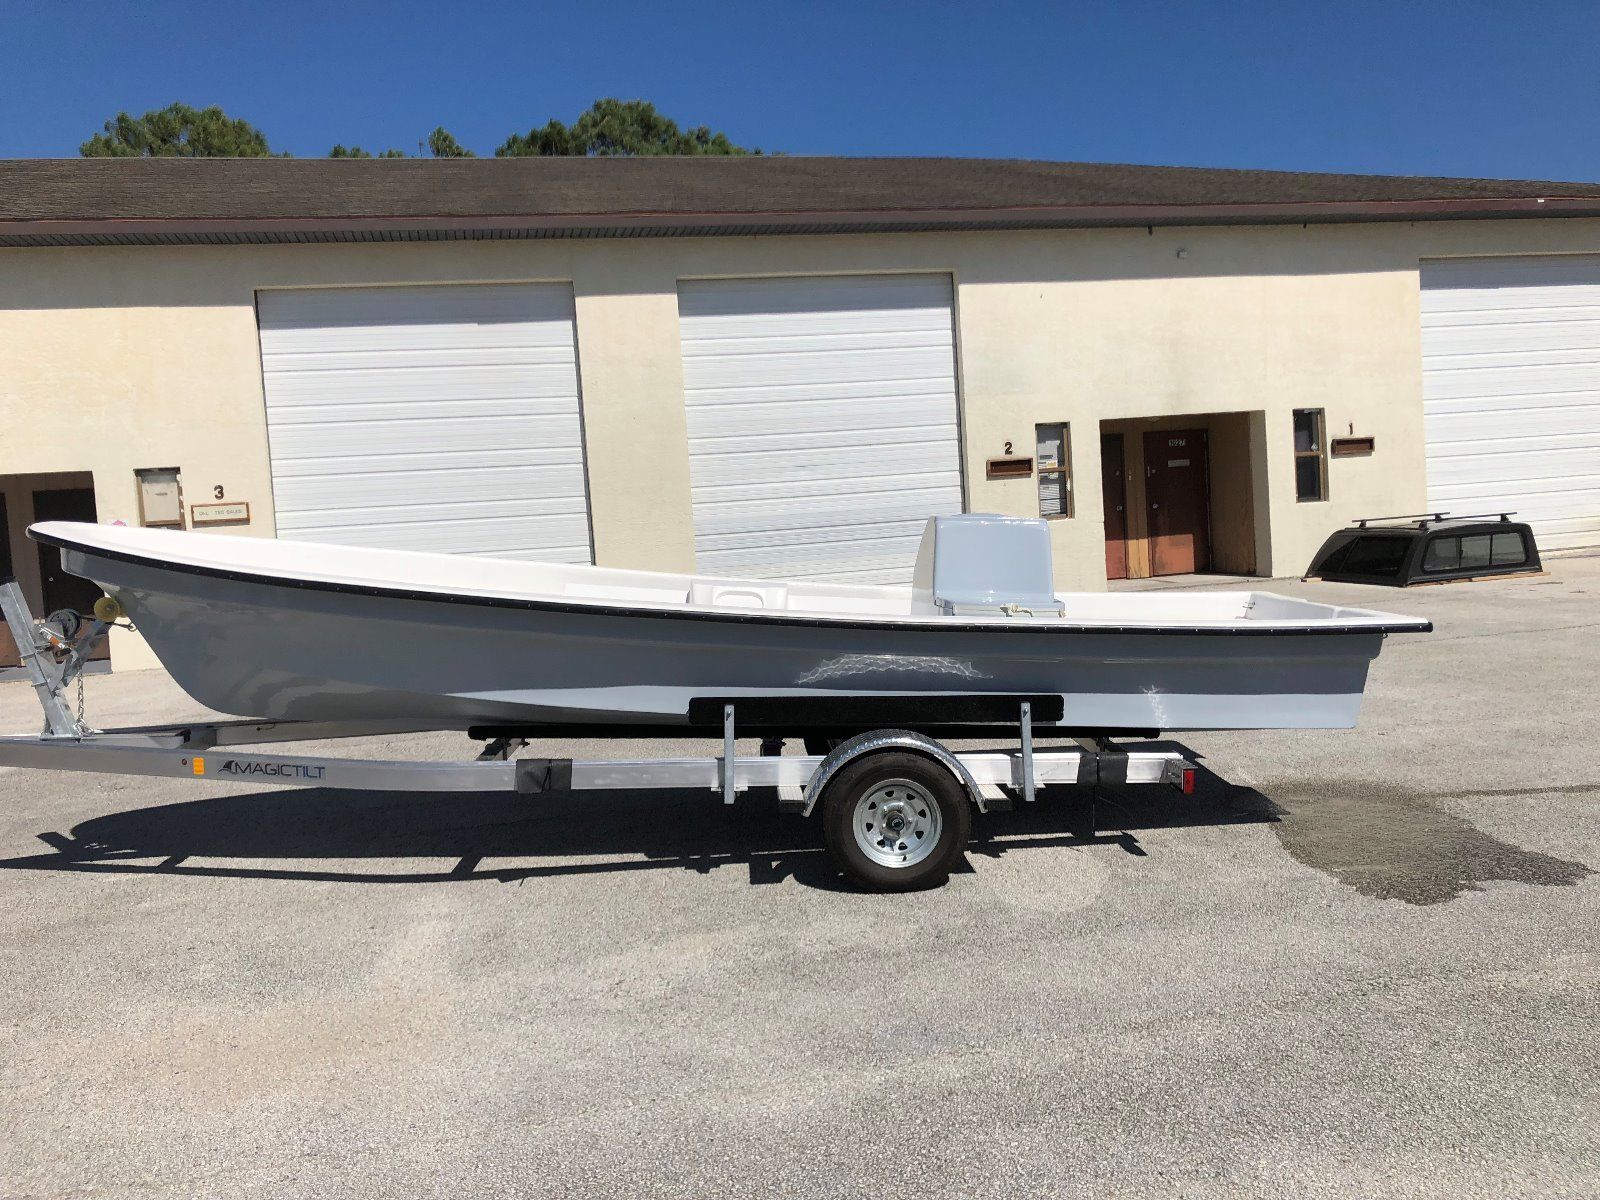 Panga 2018 for sale for $17,200 - Boats-from-USA.com